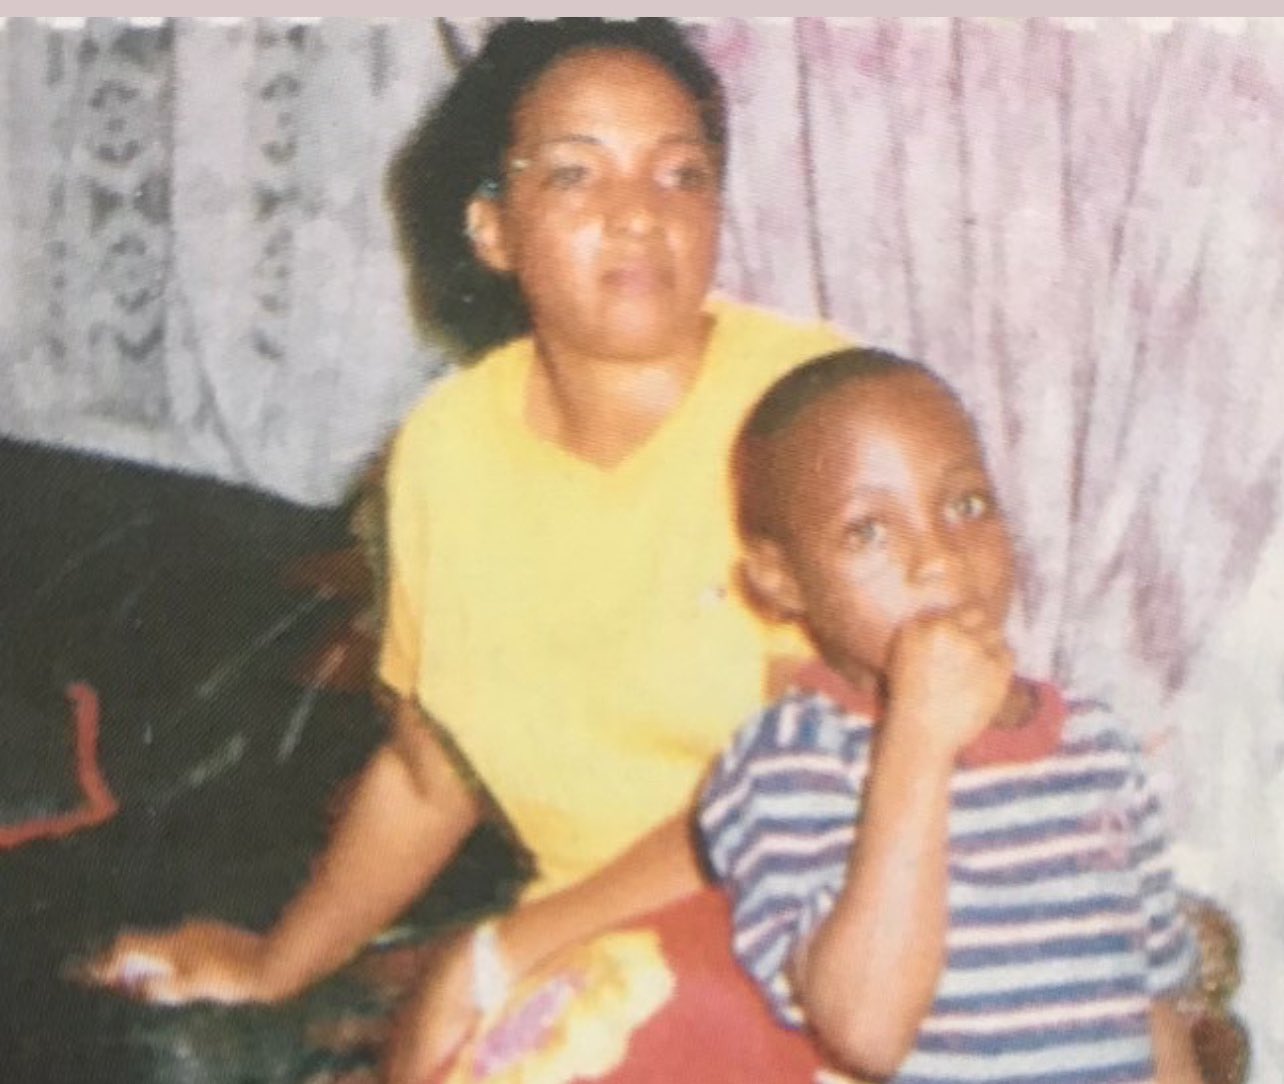 The Letter Davido Wrote To His Late Mother, Veronica Adeleke(Photo) 12982546_img20210113131802_jpeg0a2a1a5c4292f5dcf77dac5dfeaf2e14